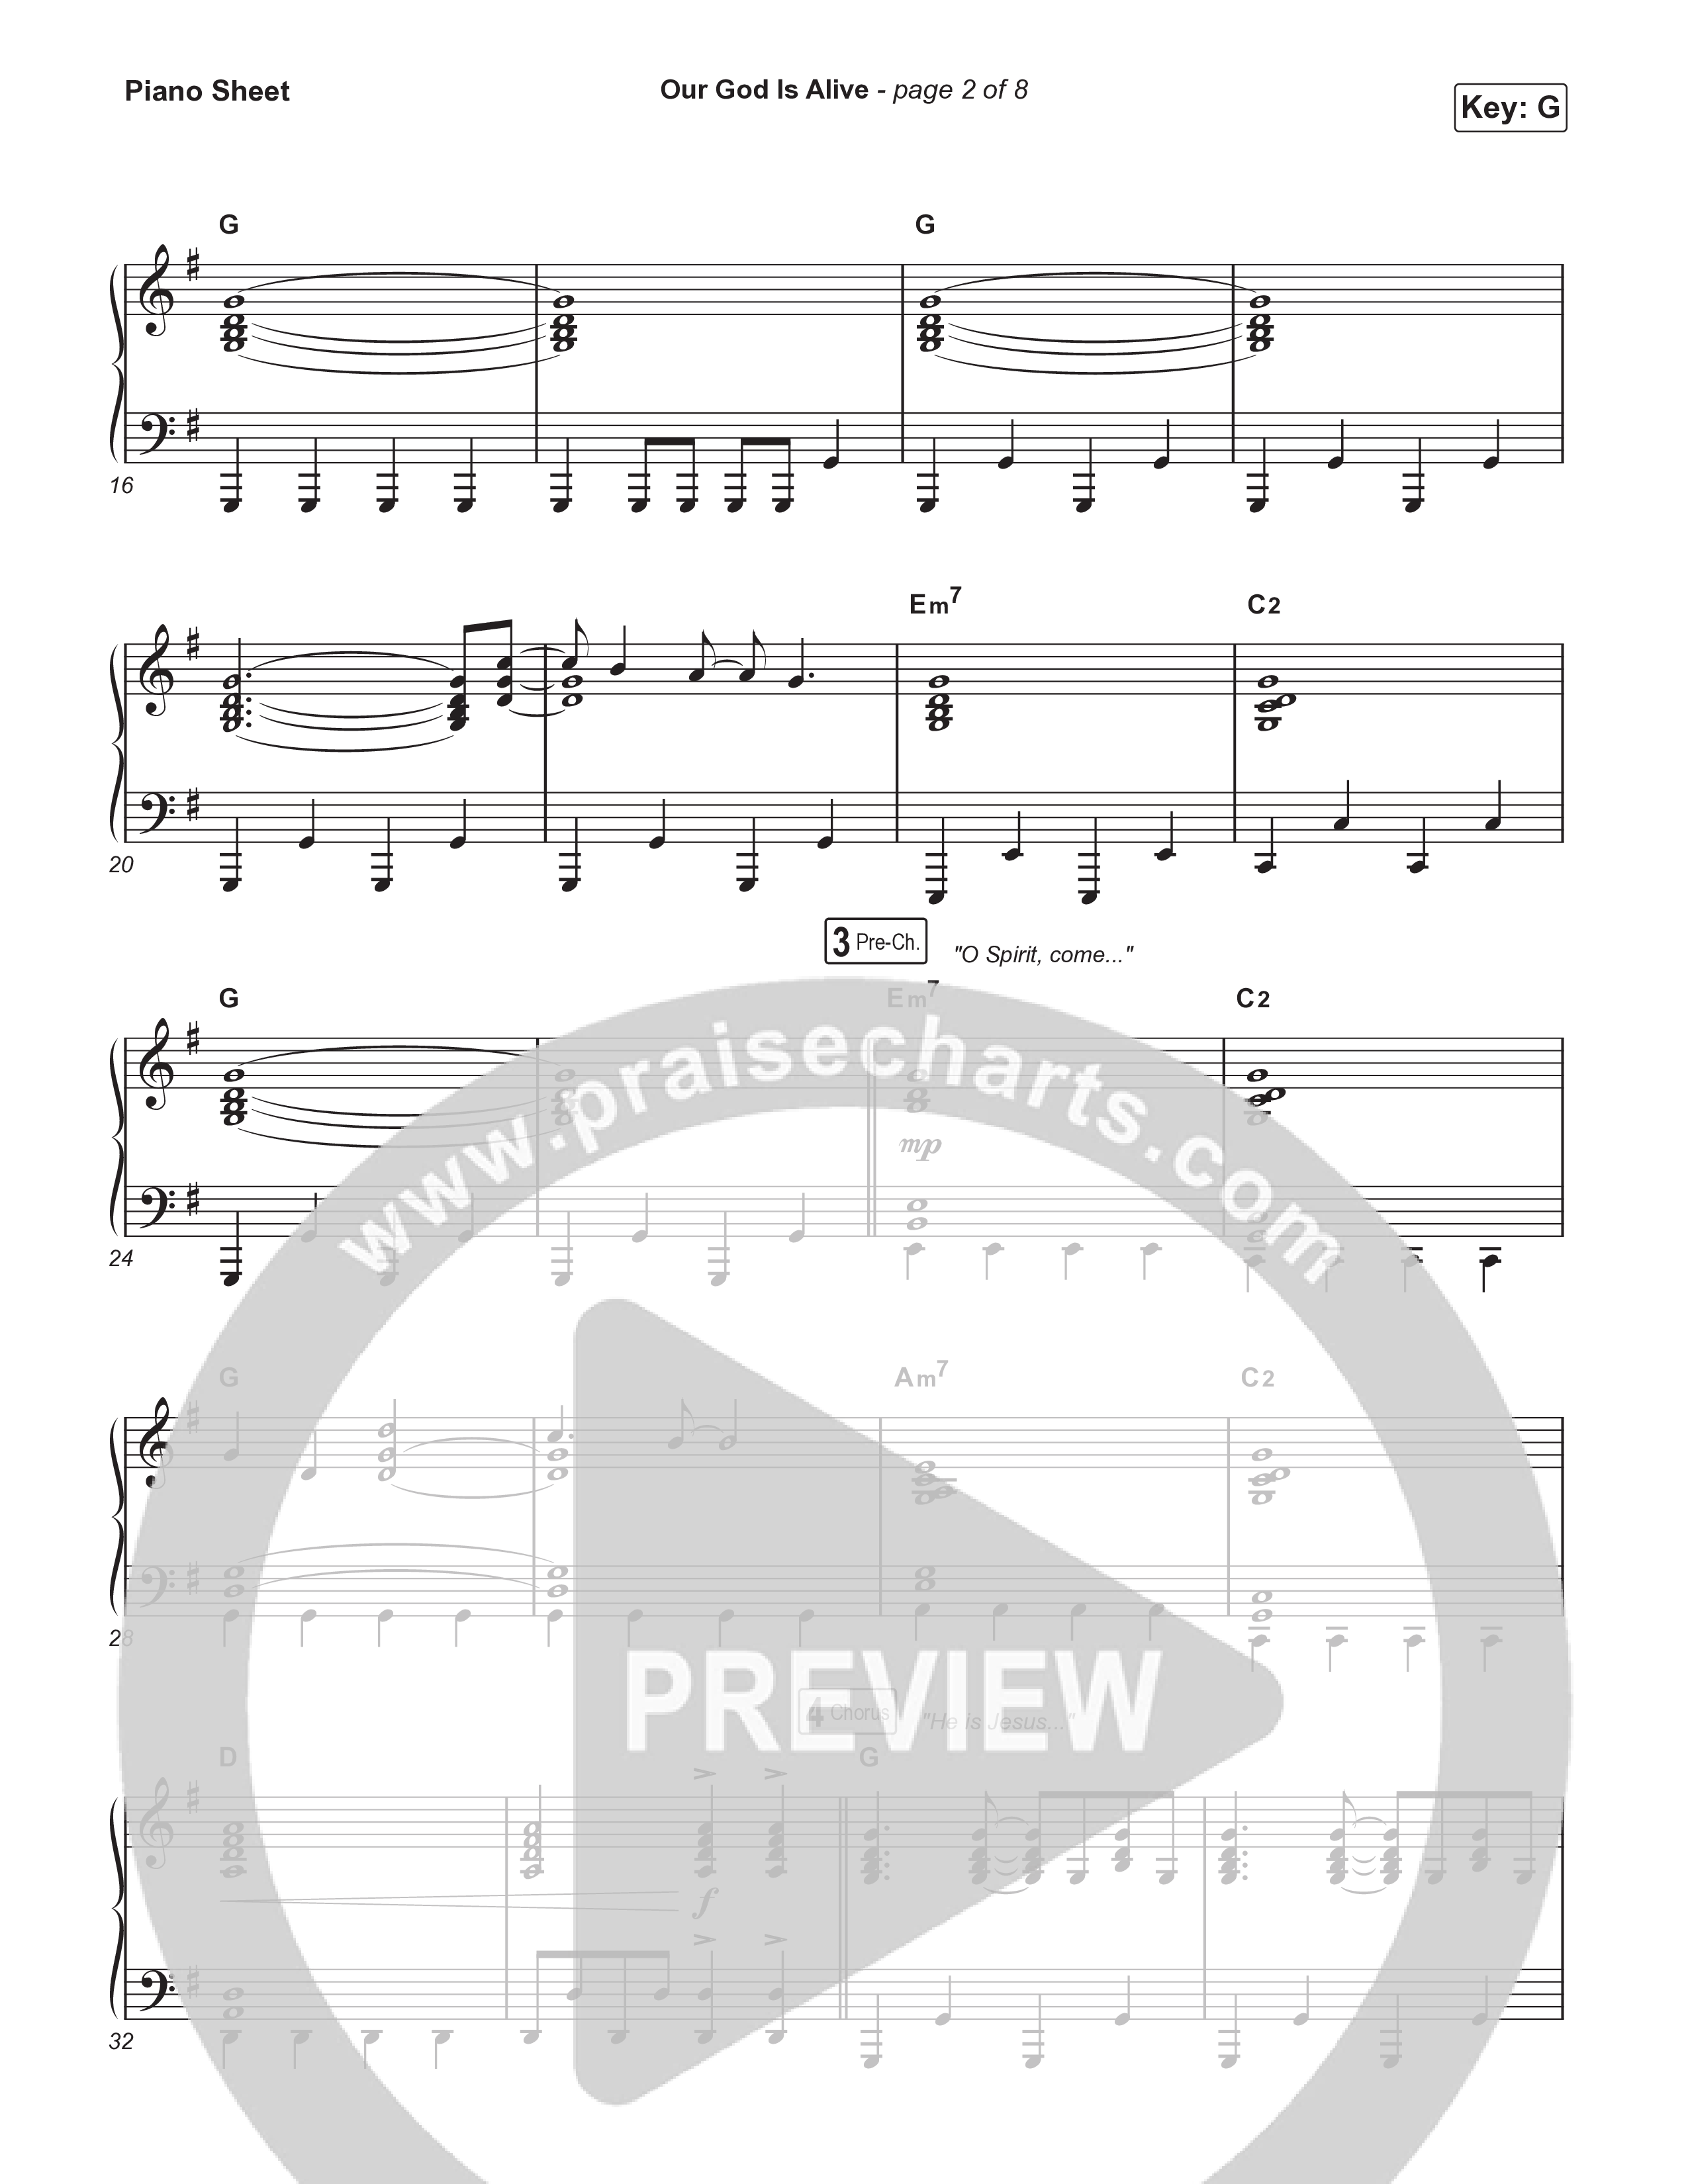 Our God Is Alive Piano Sheet (Austin Stone Worship)